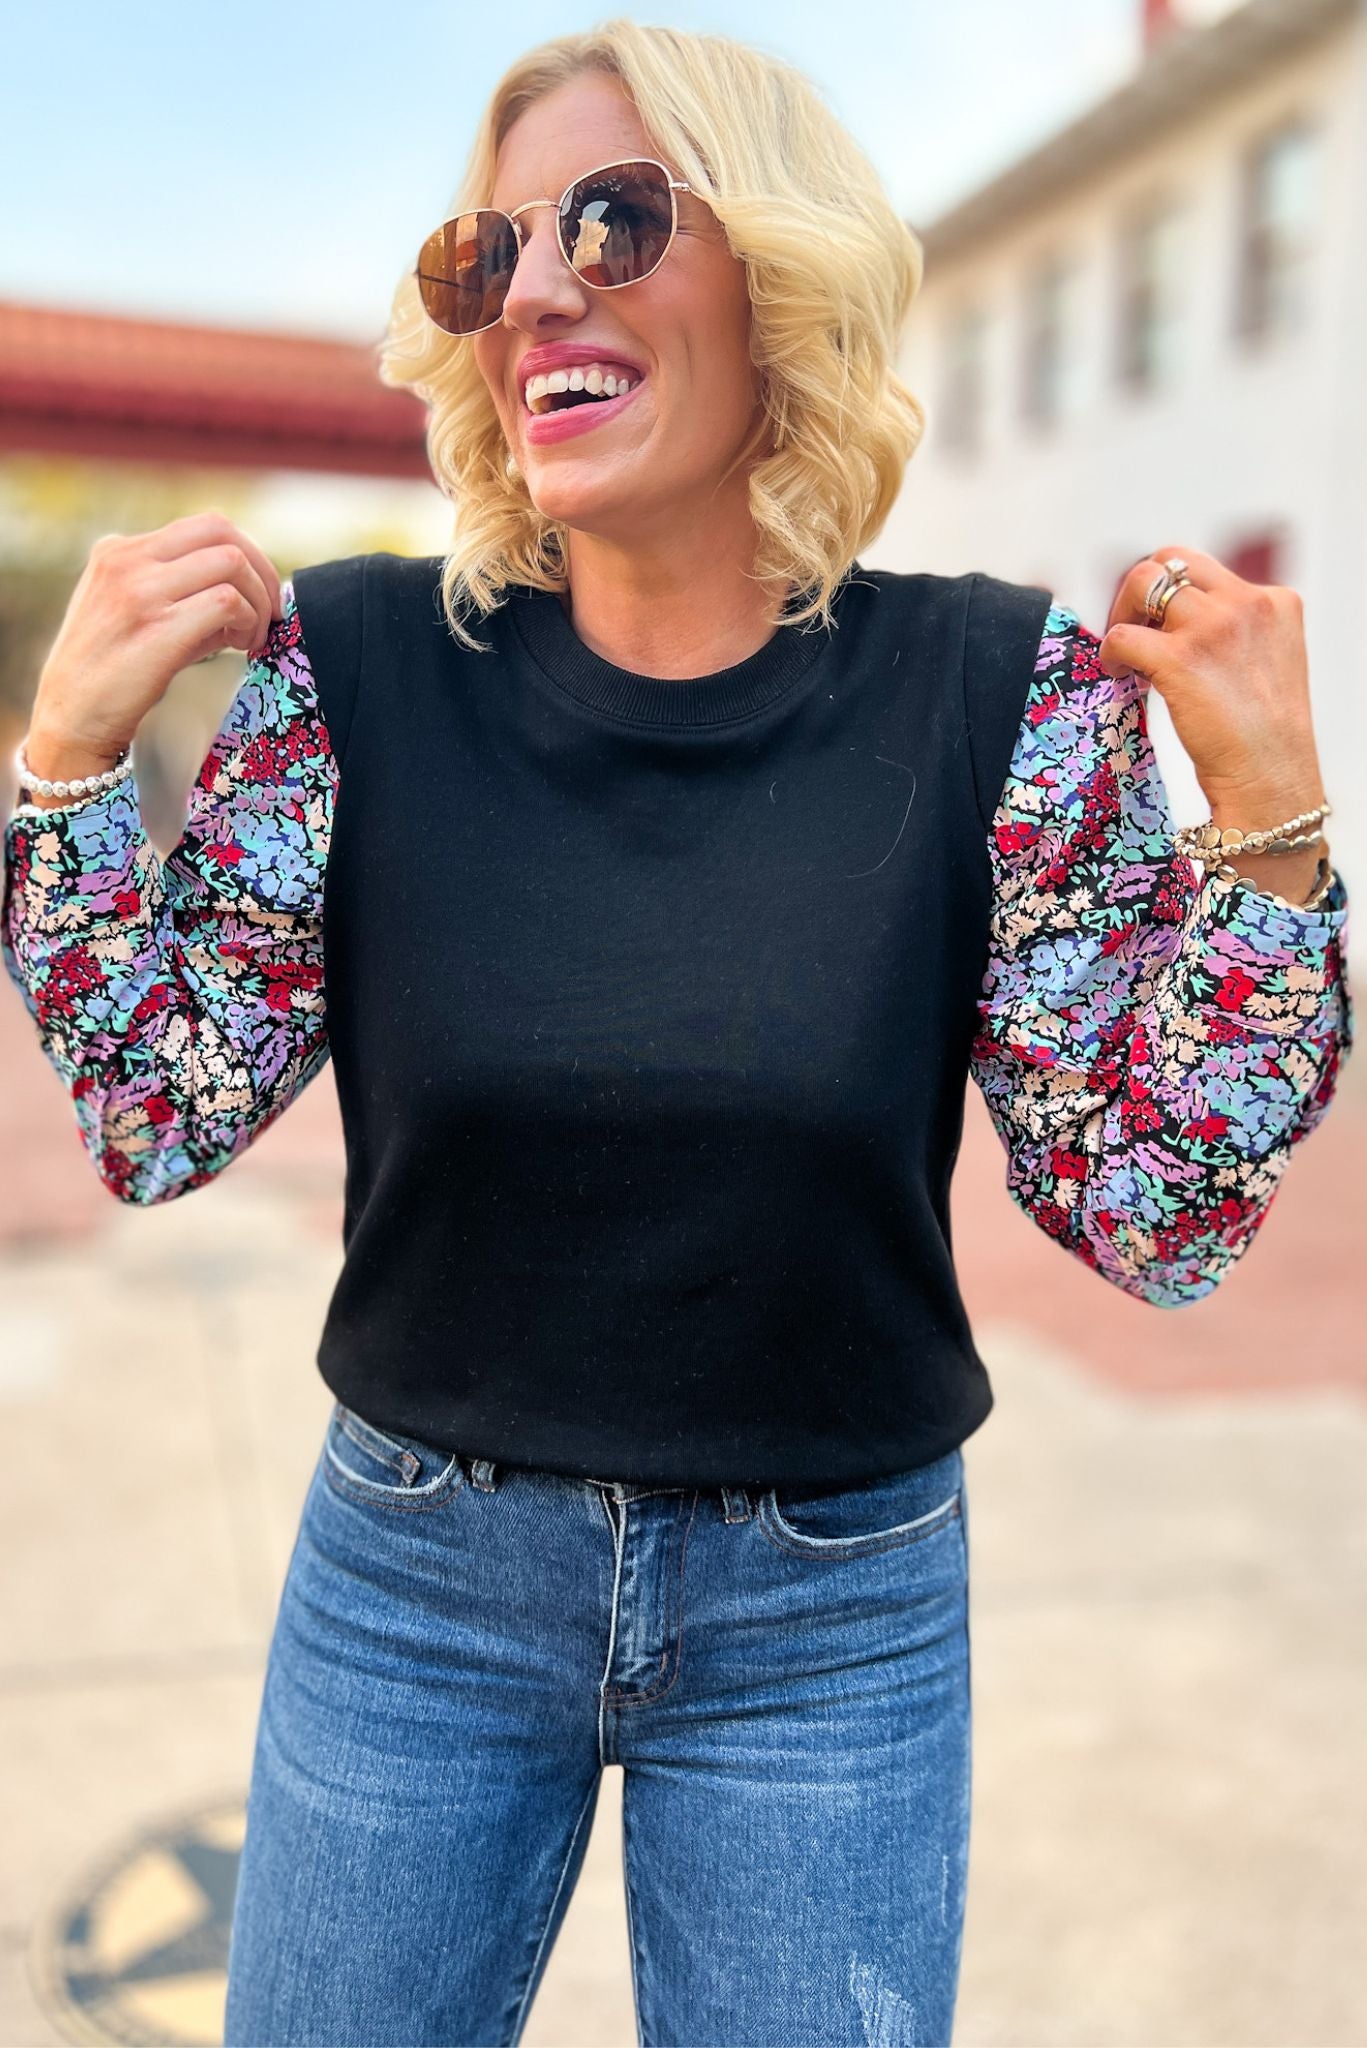 Black Blue Floral Poplin Sleeve Knit Top by Karlie, floral sleeve detail, knit top, lightweight, work wear, mom style, must have, karlie, shop style your senses by mallory fitzsimmons